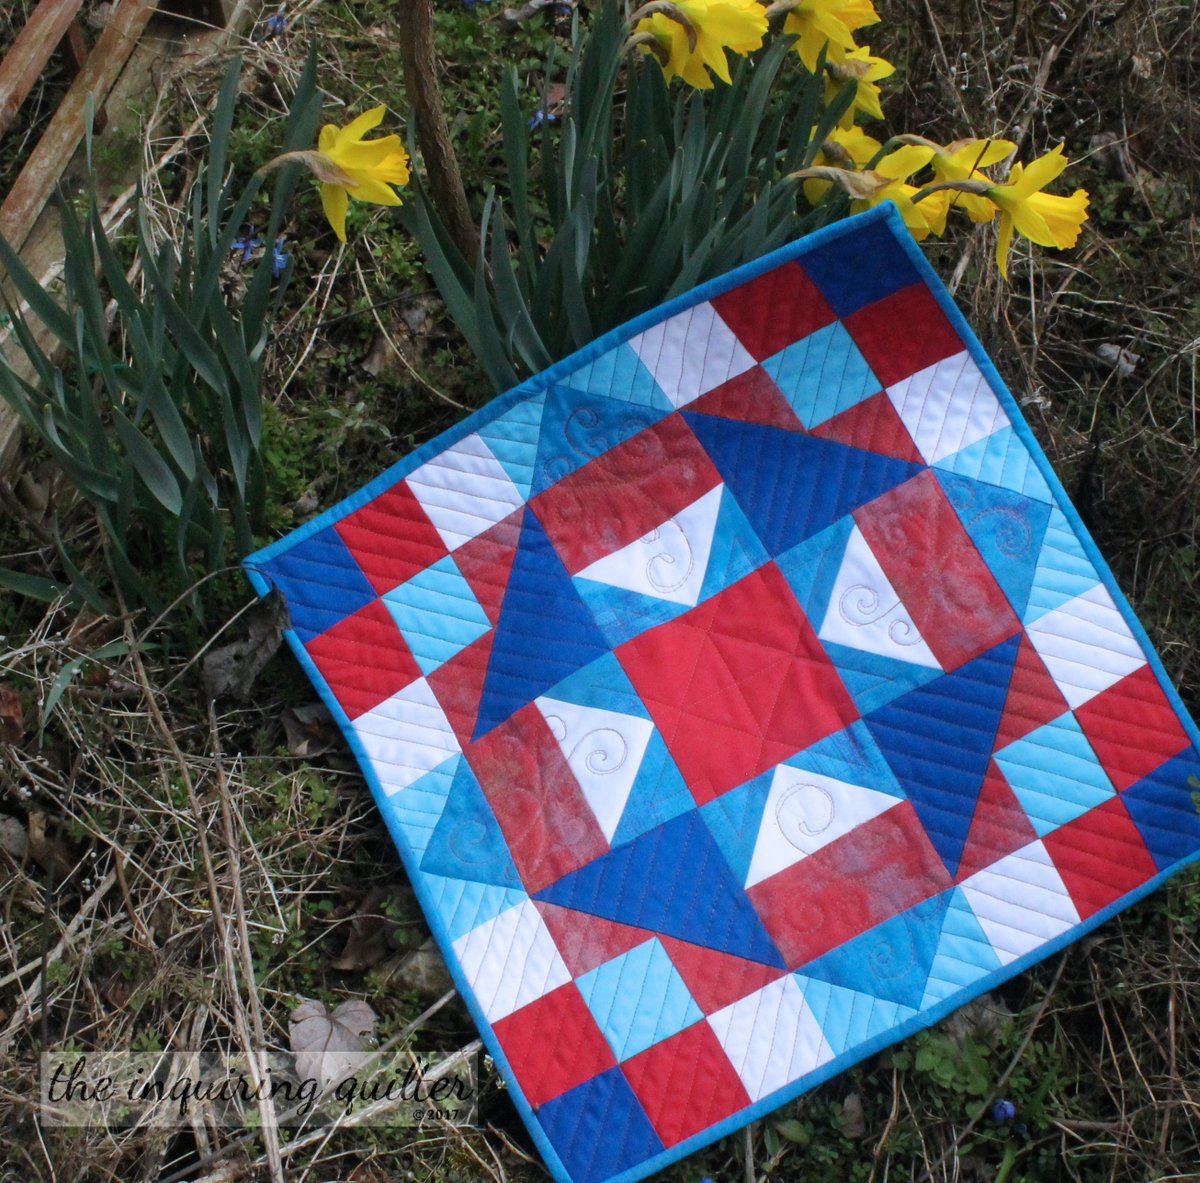 Happy Fourth of July to my American friends!

I made this quilt for an English friend of mine, and chose the colors to represent both our countries. 

I call this Allies.

#inquiringquilter,#alliesquilt #fourthofjuly #patrioticquilt